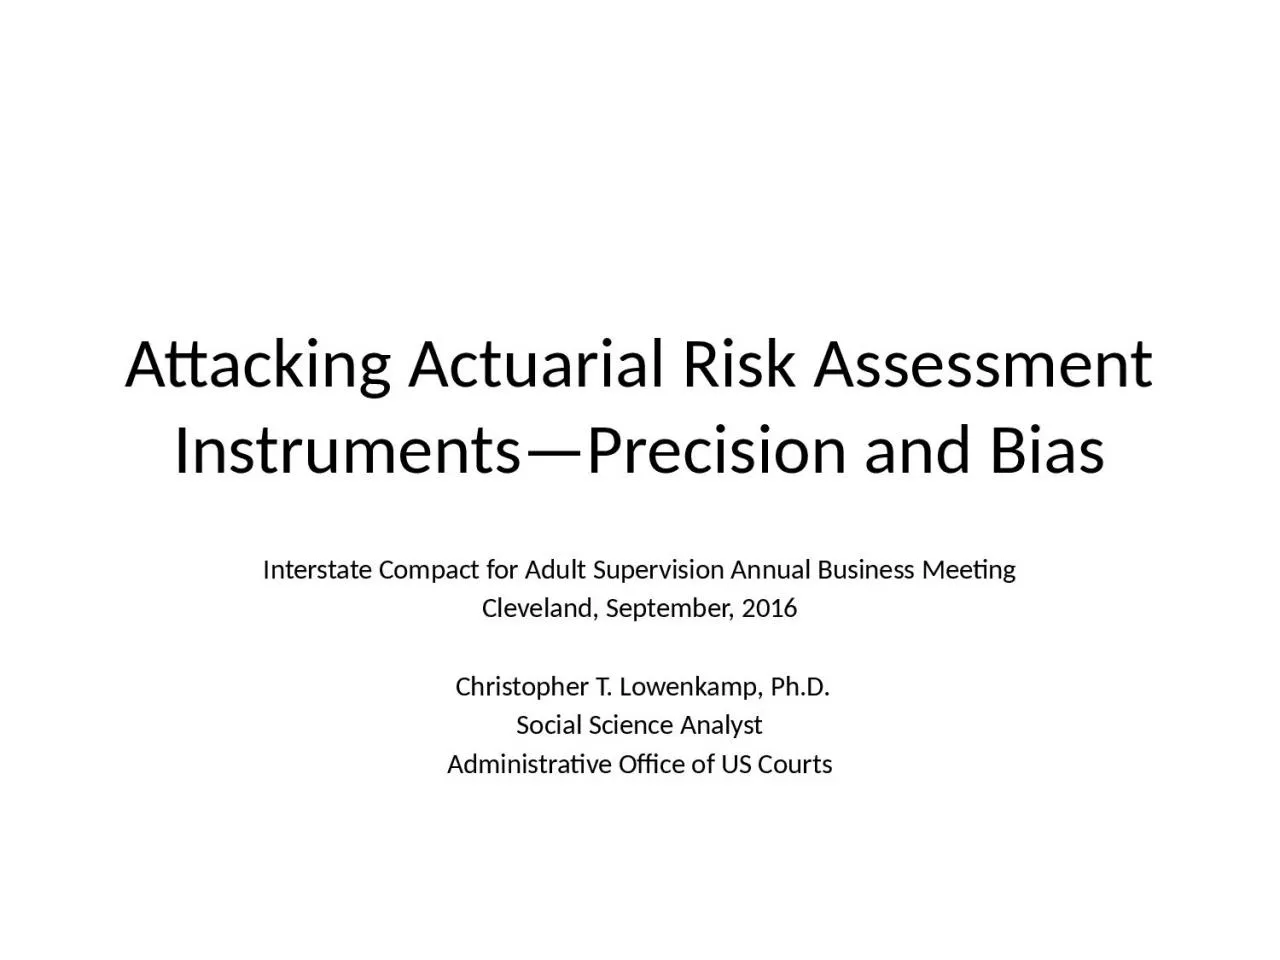 Attacking Actuarial Risk Assessment Instruments—Precision and Bias